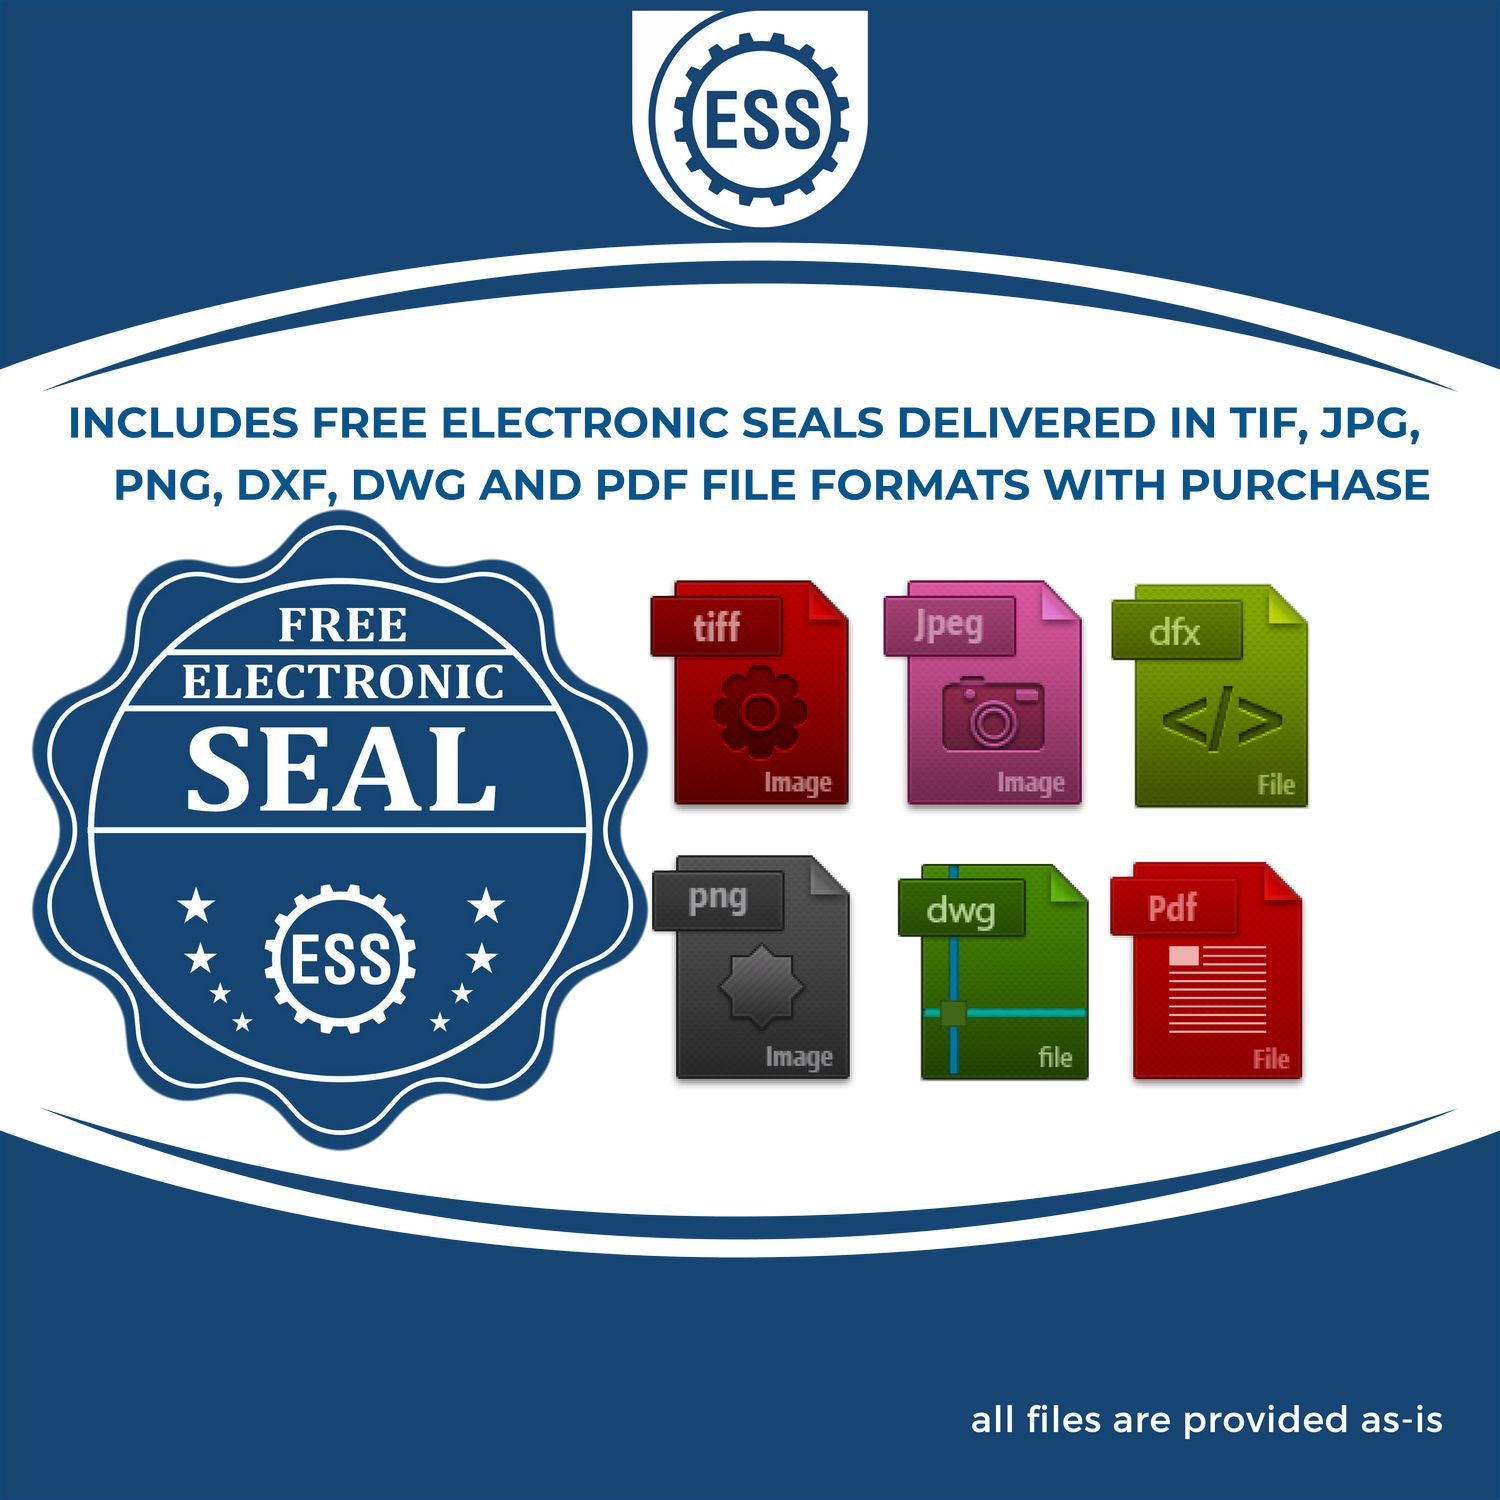 An infographic for the free electronic seal for the State of Arkansas Long Reach Architectural Embossing Seal illustrating the different file type icons such as DXF, DWG, TIF, JPG and PNG.